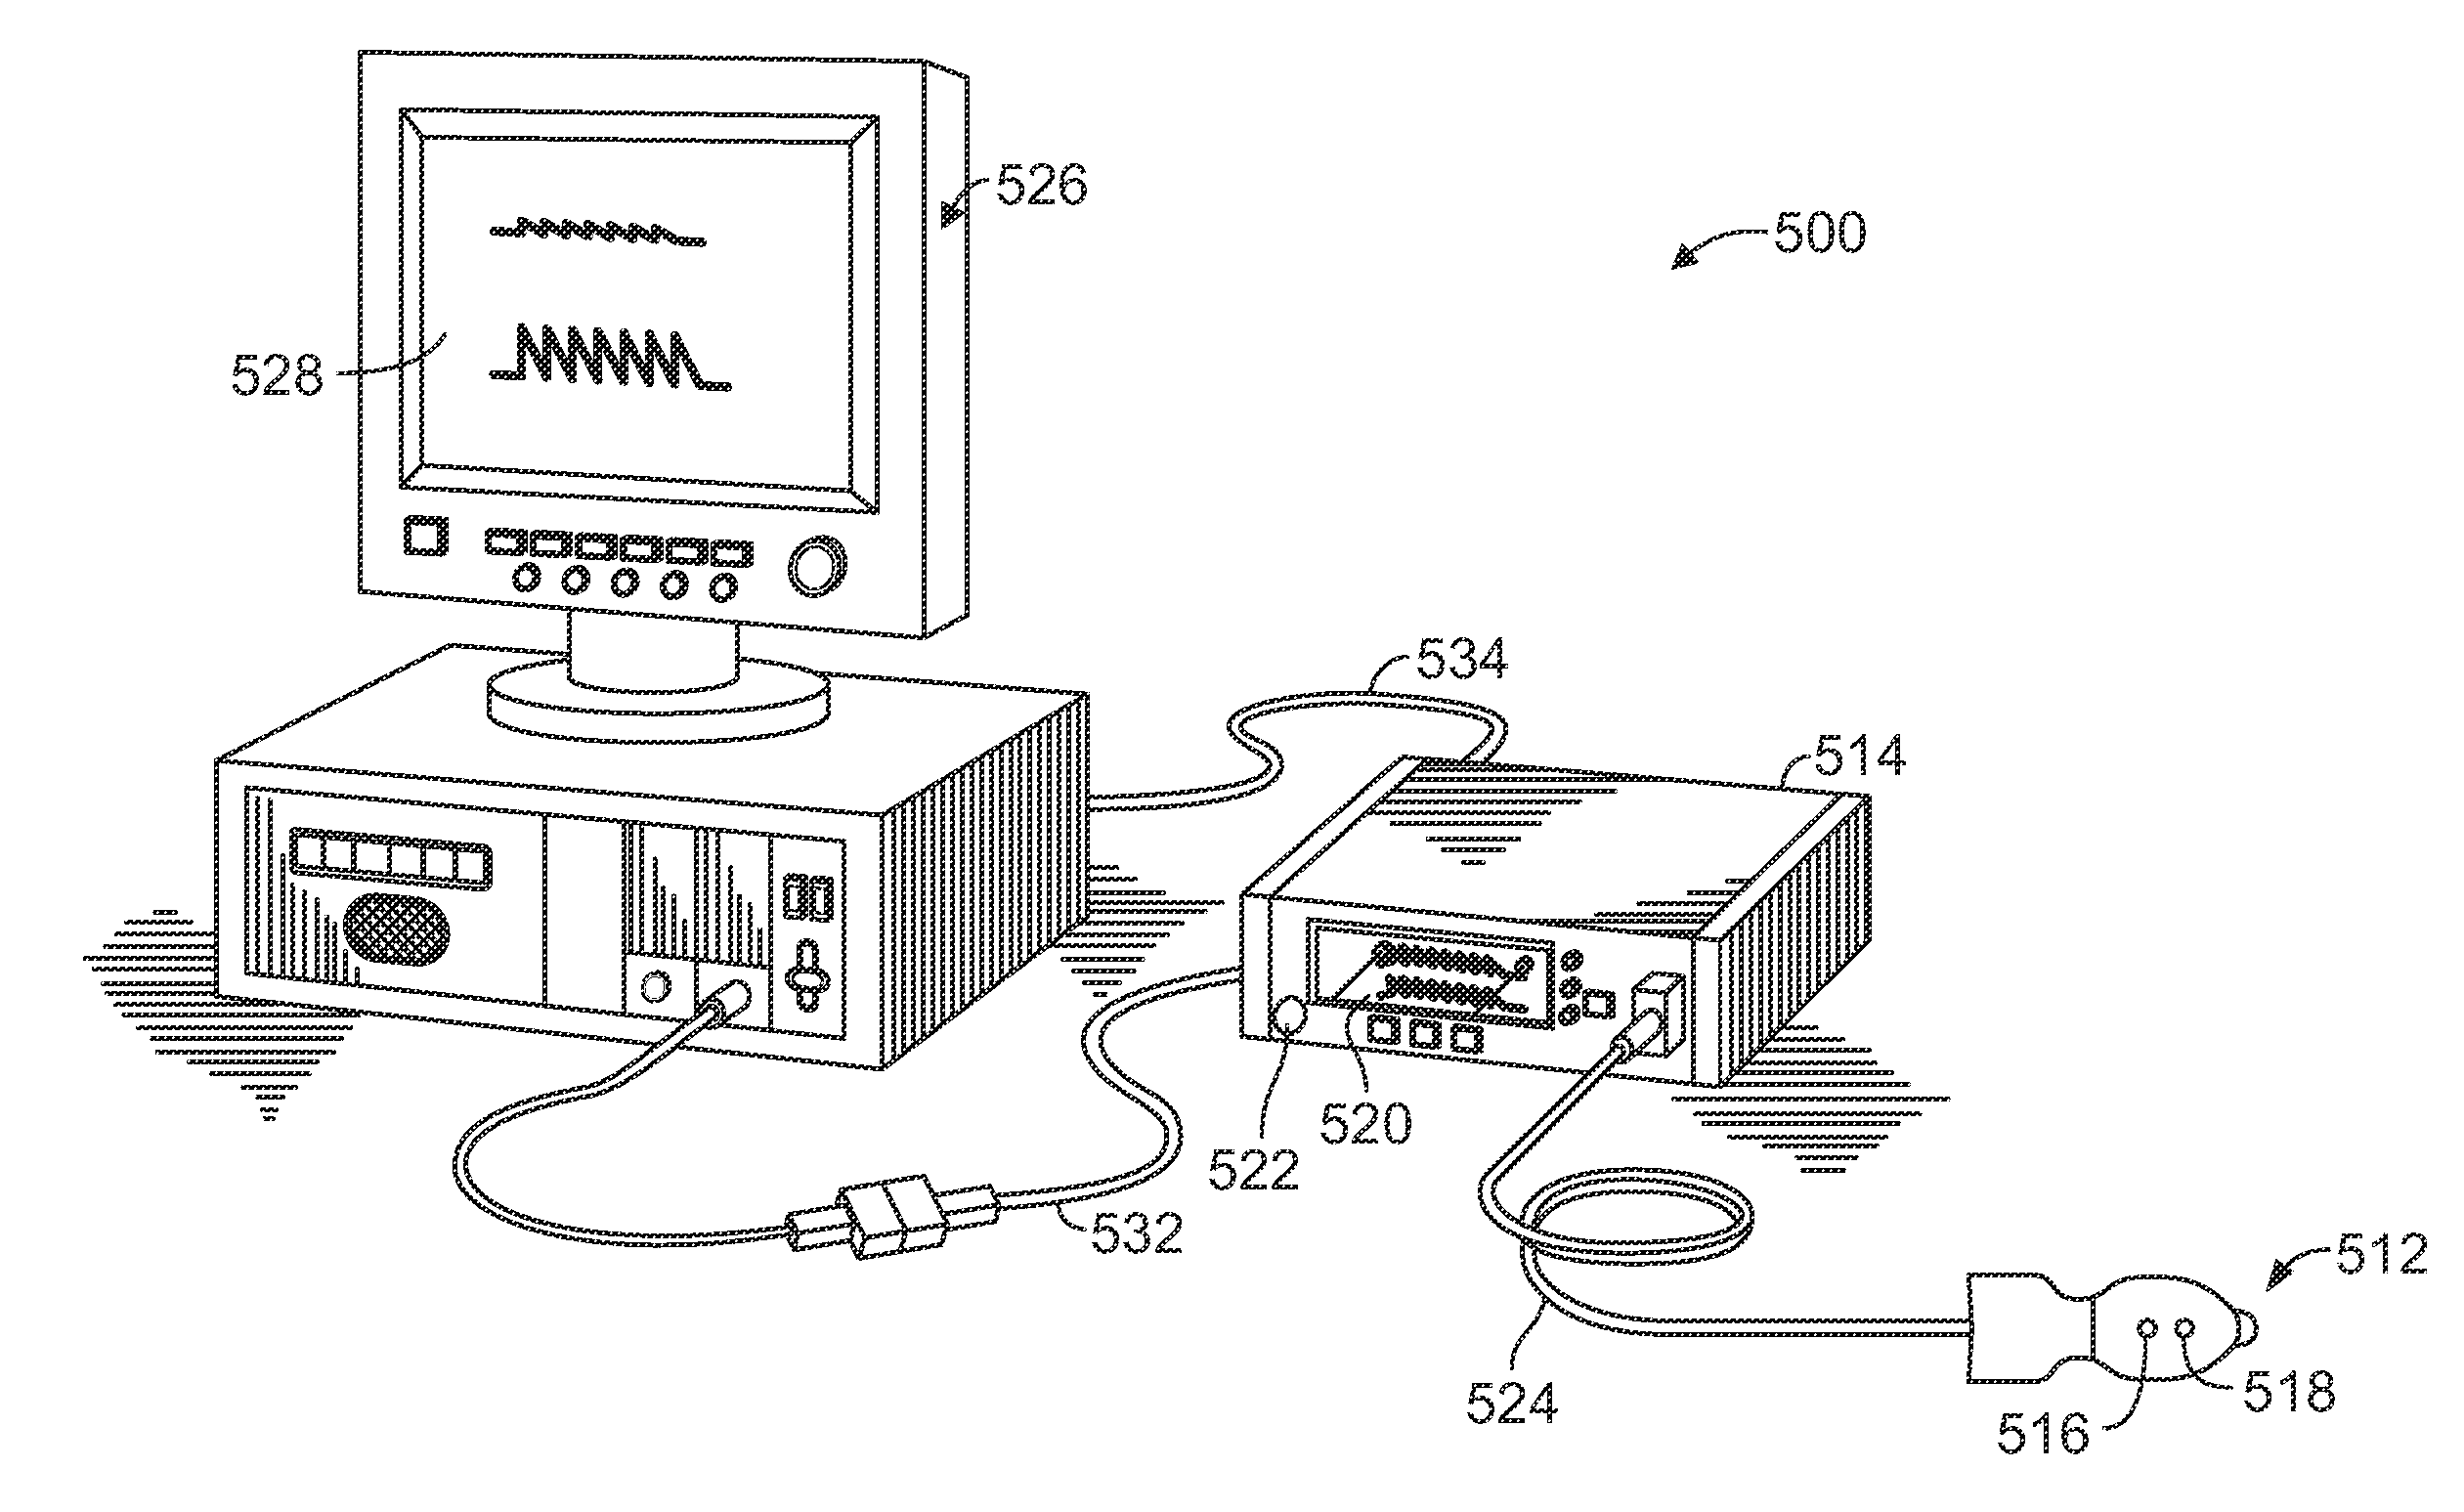 System and method for displaying fluid responsivenss predictors